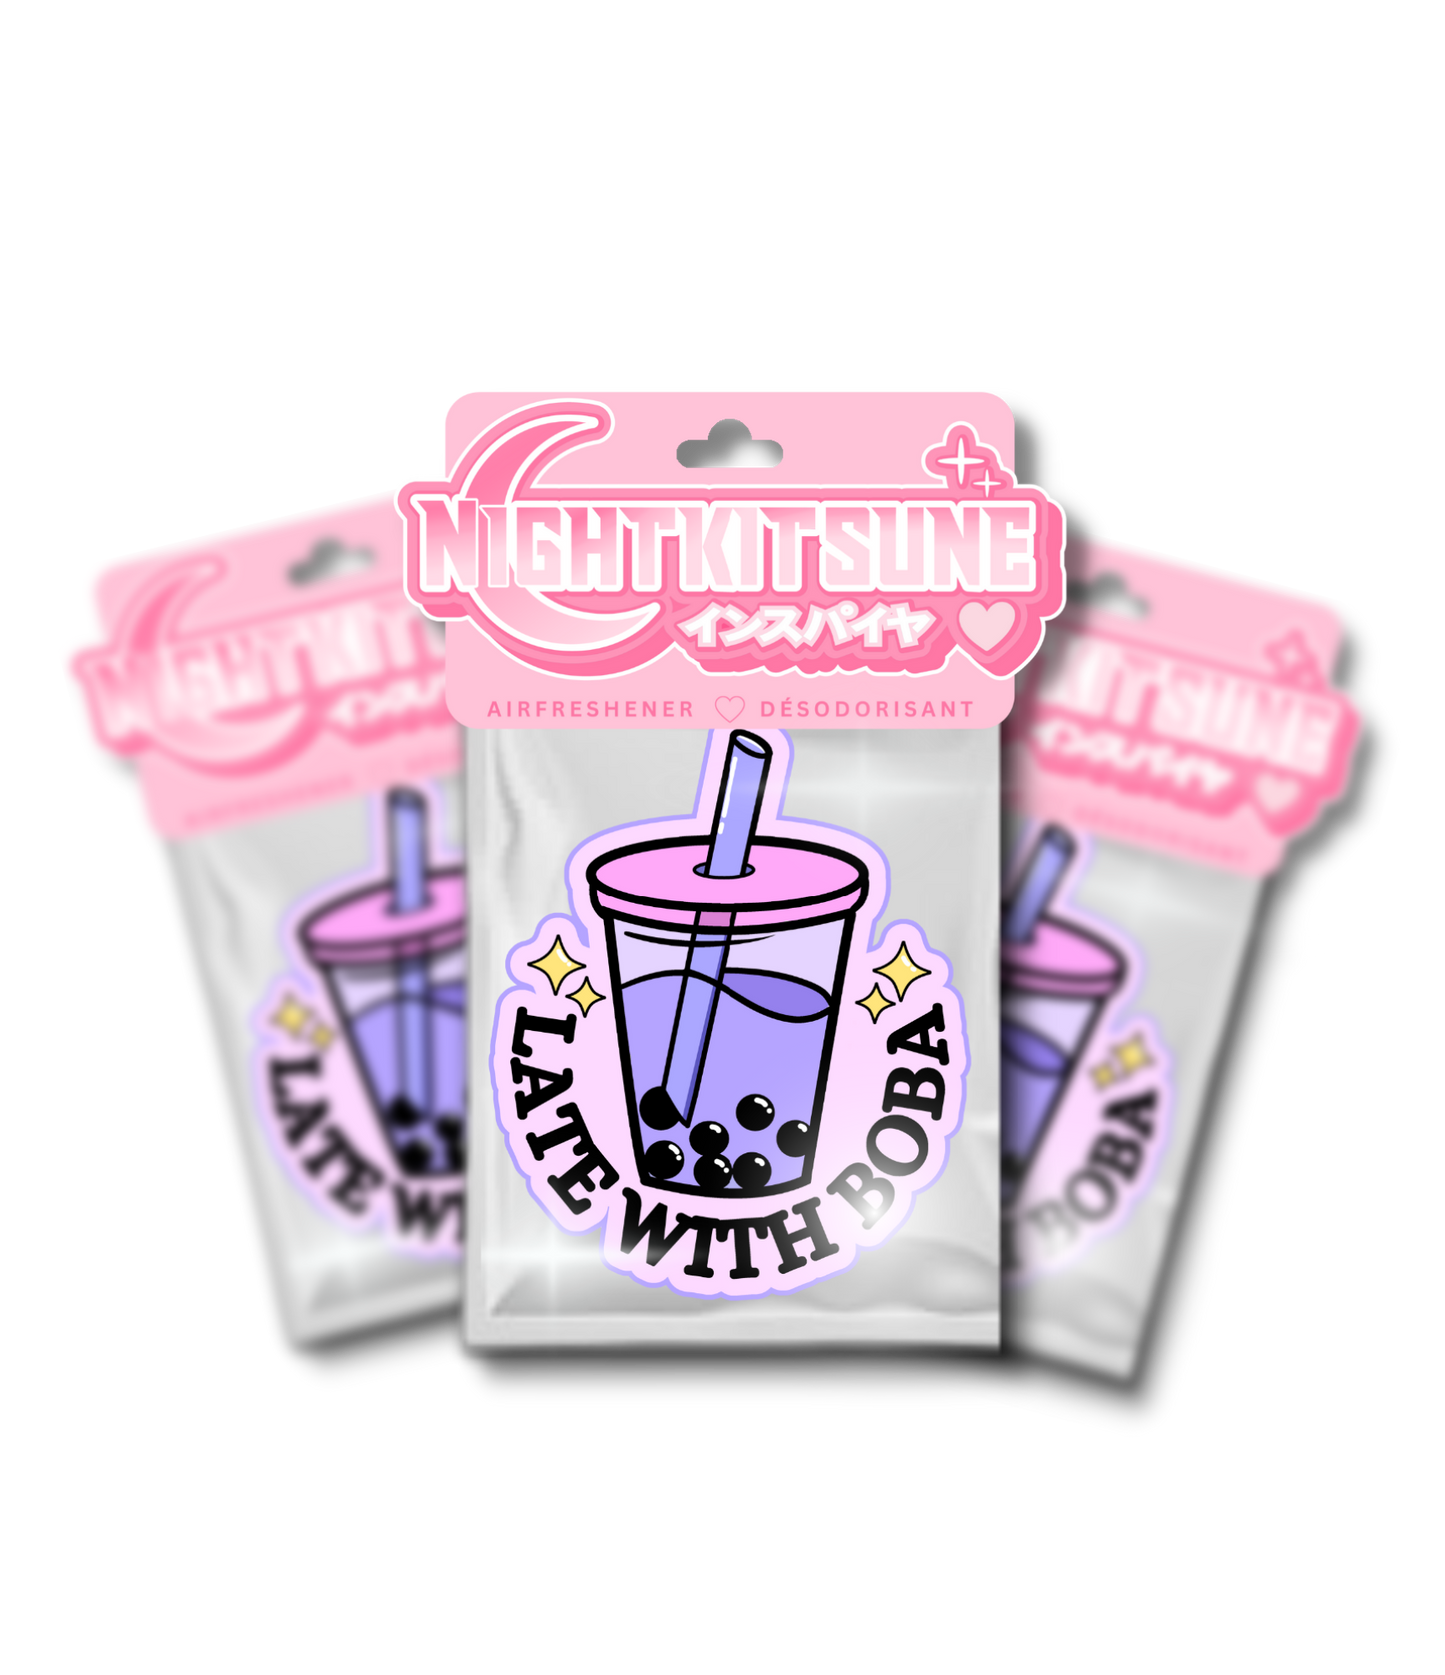 Late with boba! - Air Freshener